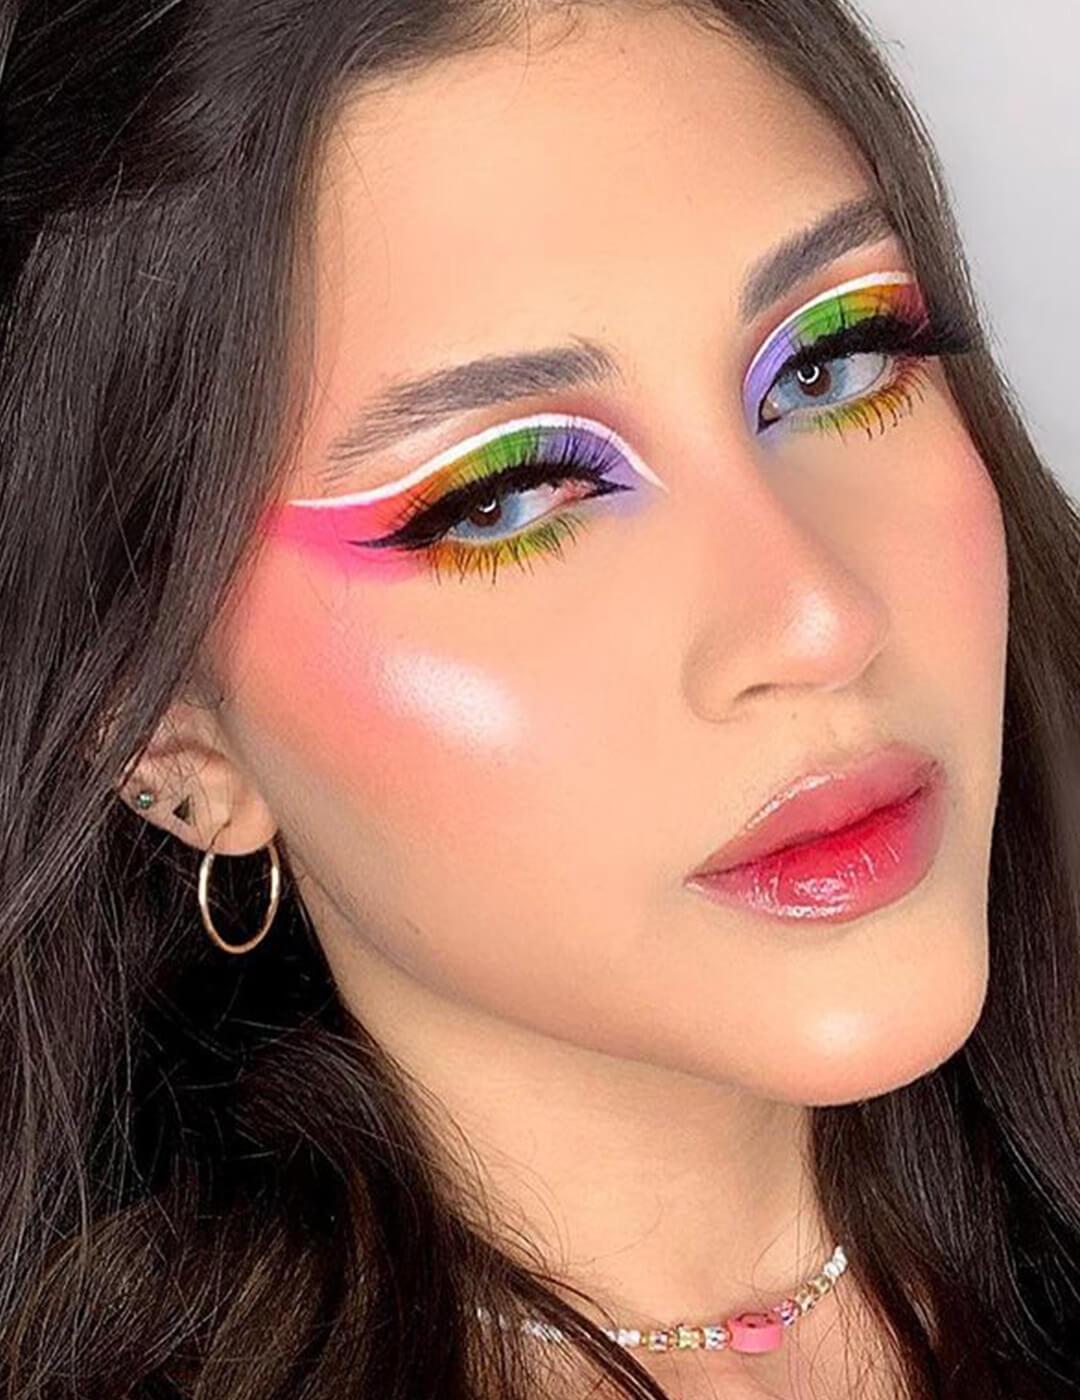 Close-up of a beautiful woman's rainbow eyeshadow makeup look with graphic white eyeliner